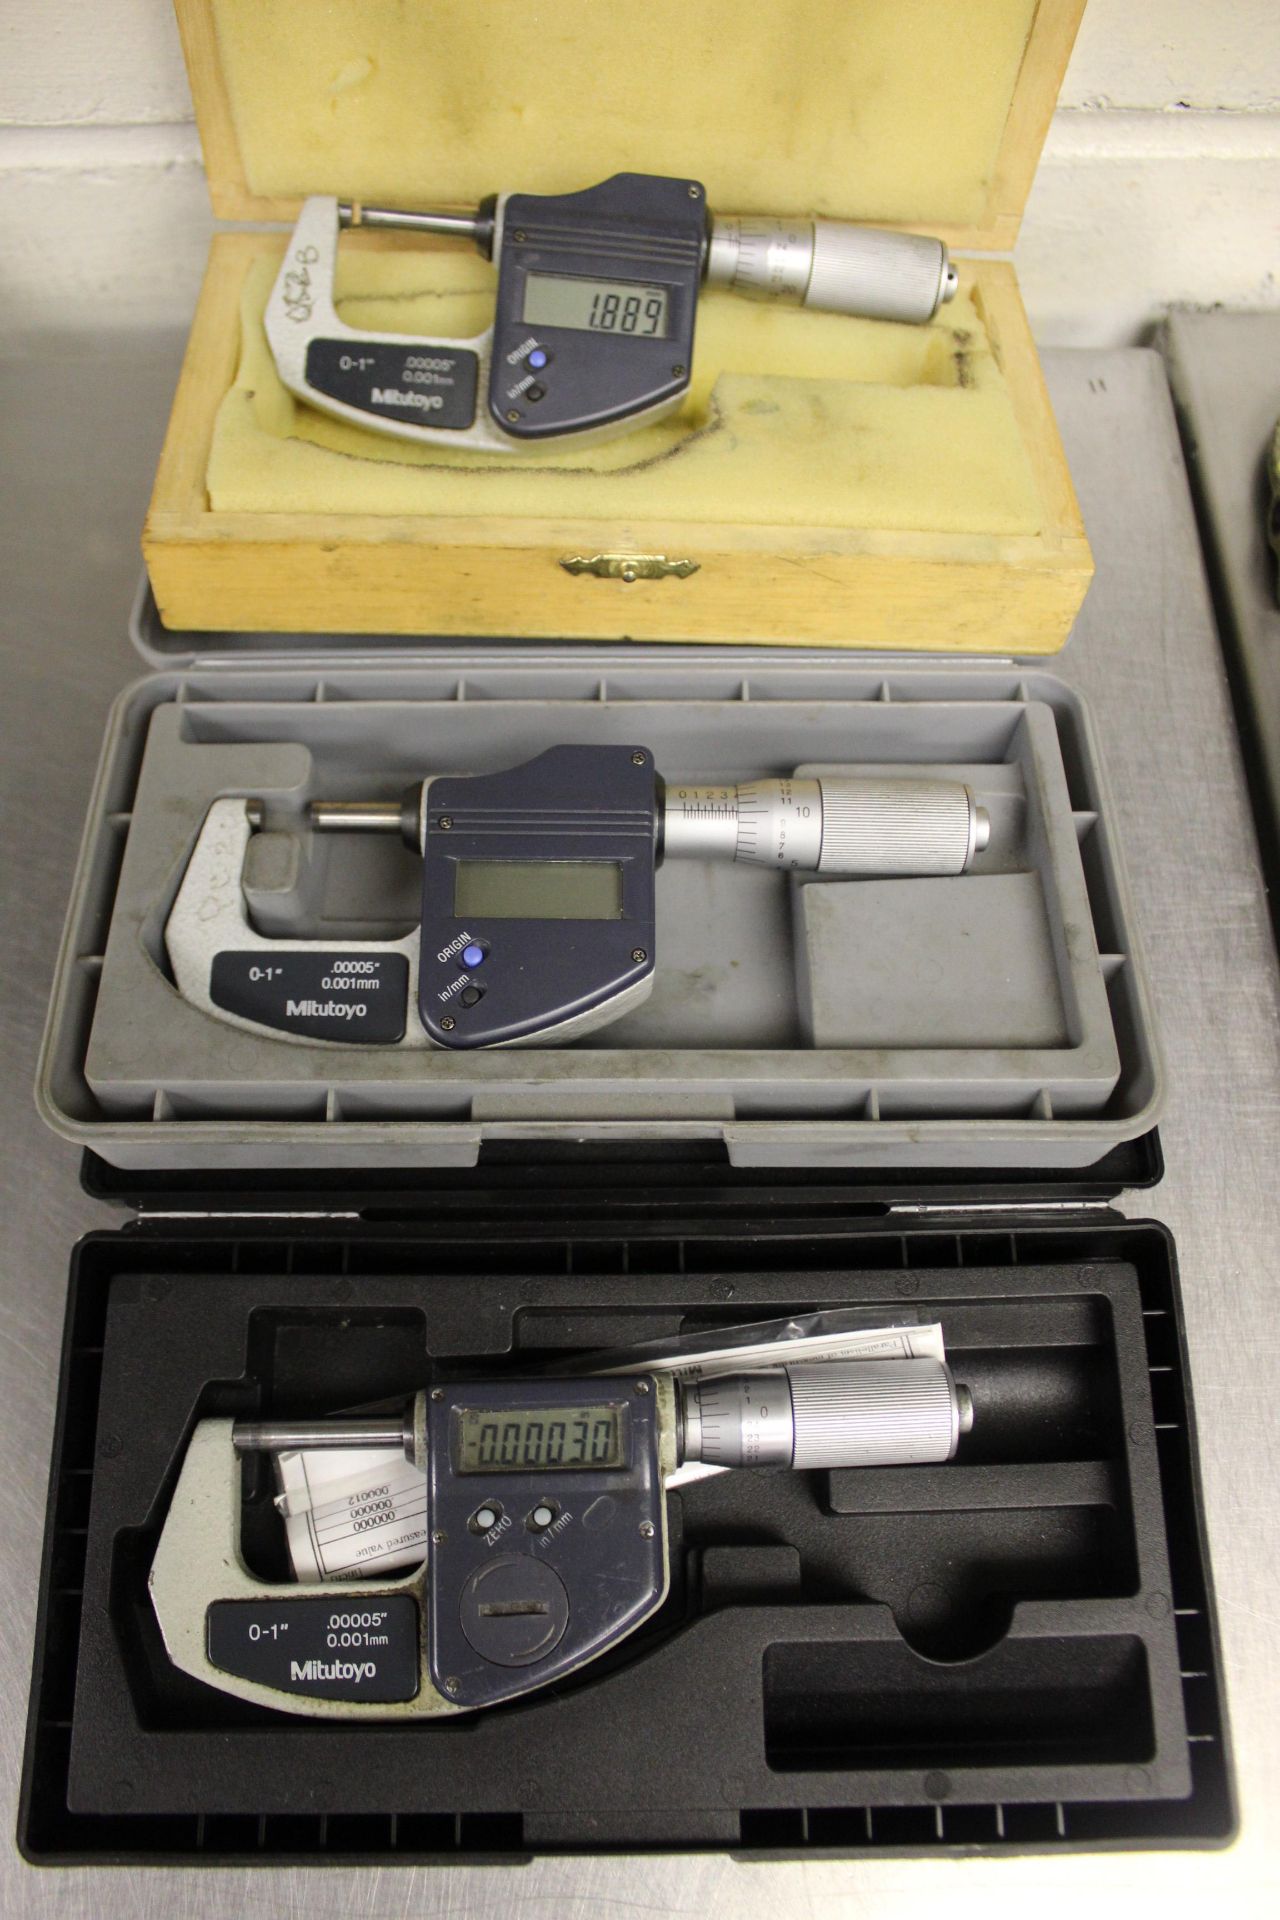 3x Boxed Mitutoyo 0-1"-.00005" electronic micrometers